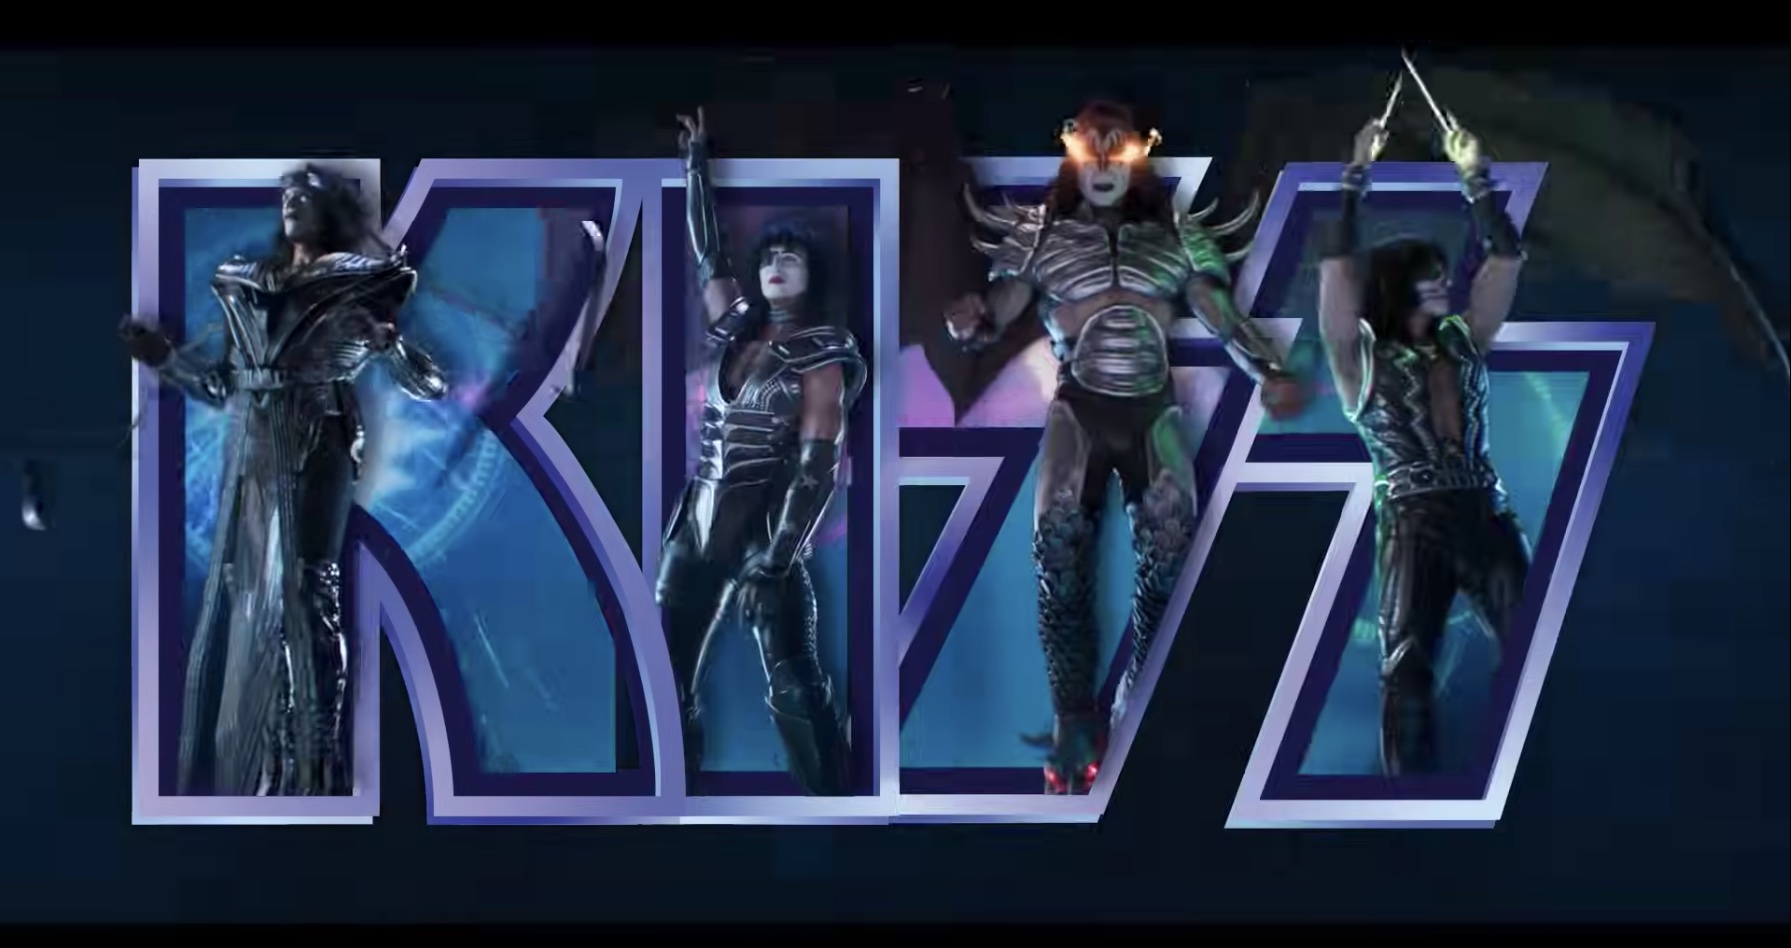 KISS played their final show, but say they’ll “rock forever” as digital avatars